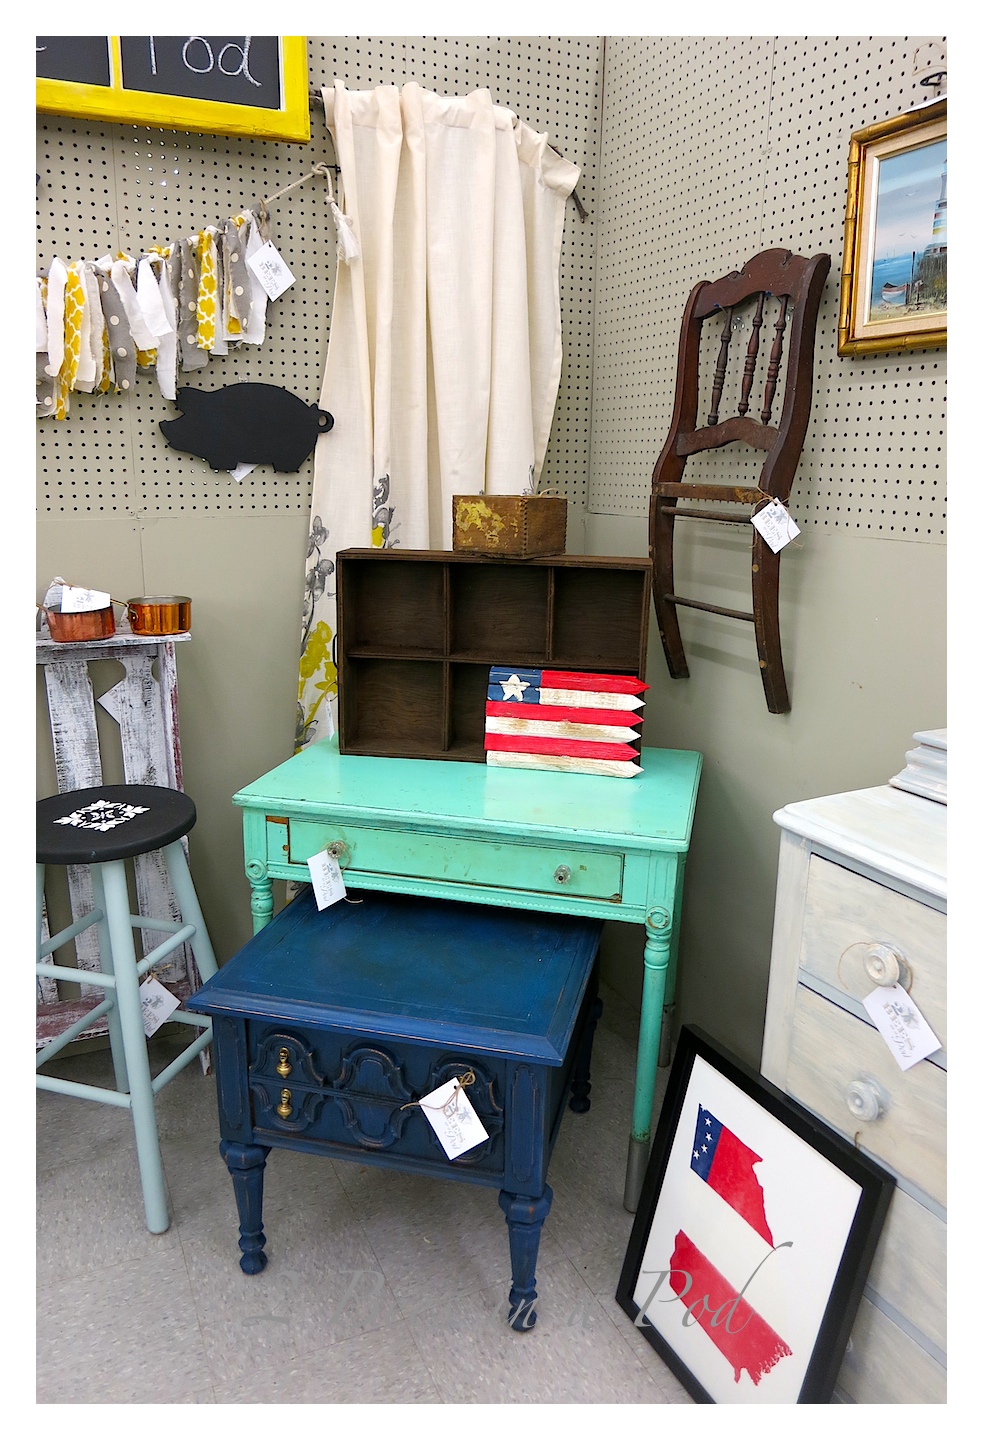 This is our new sales space to share our painted furniture, handmade items and vintage items.